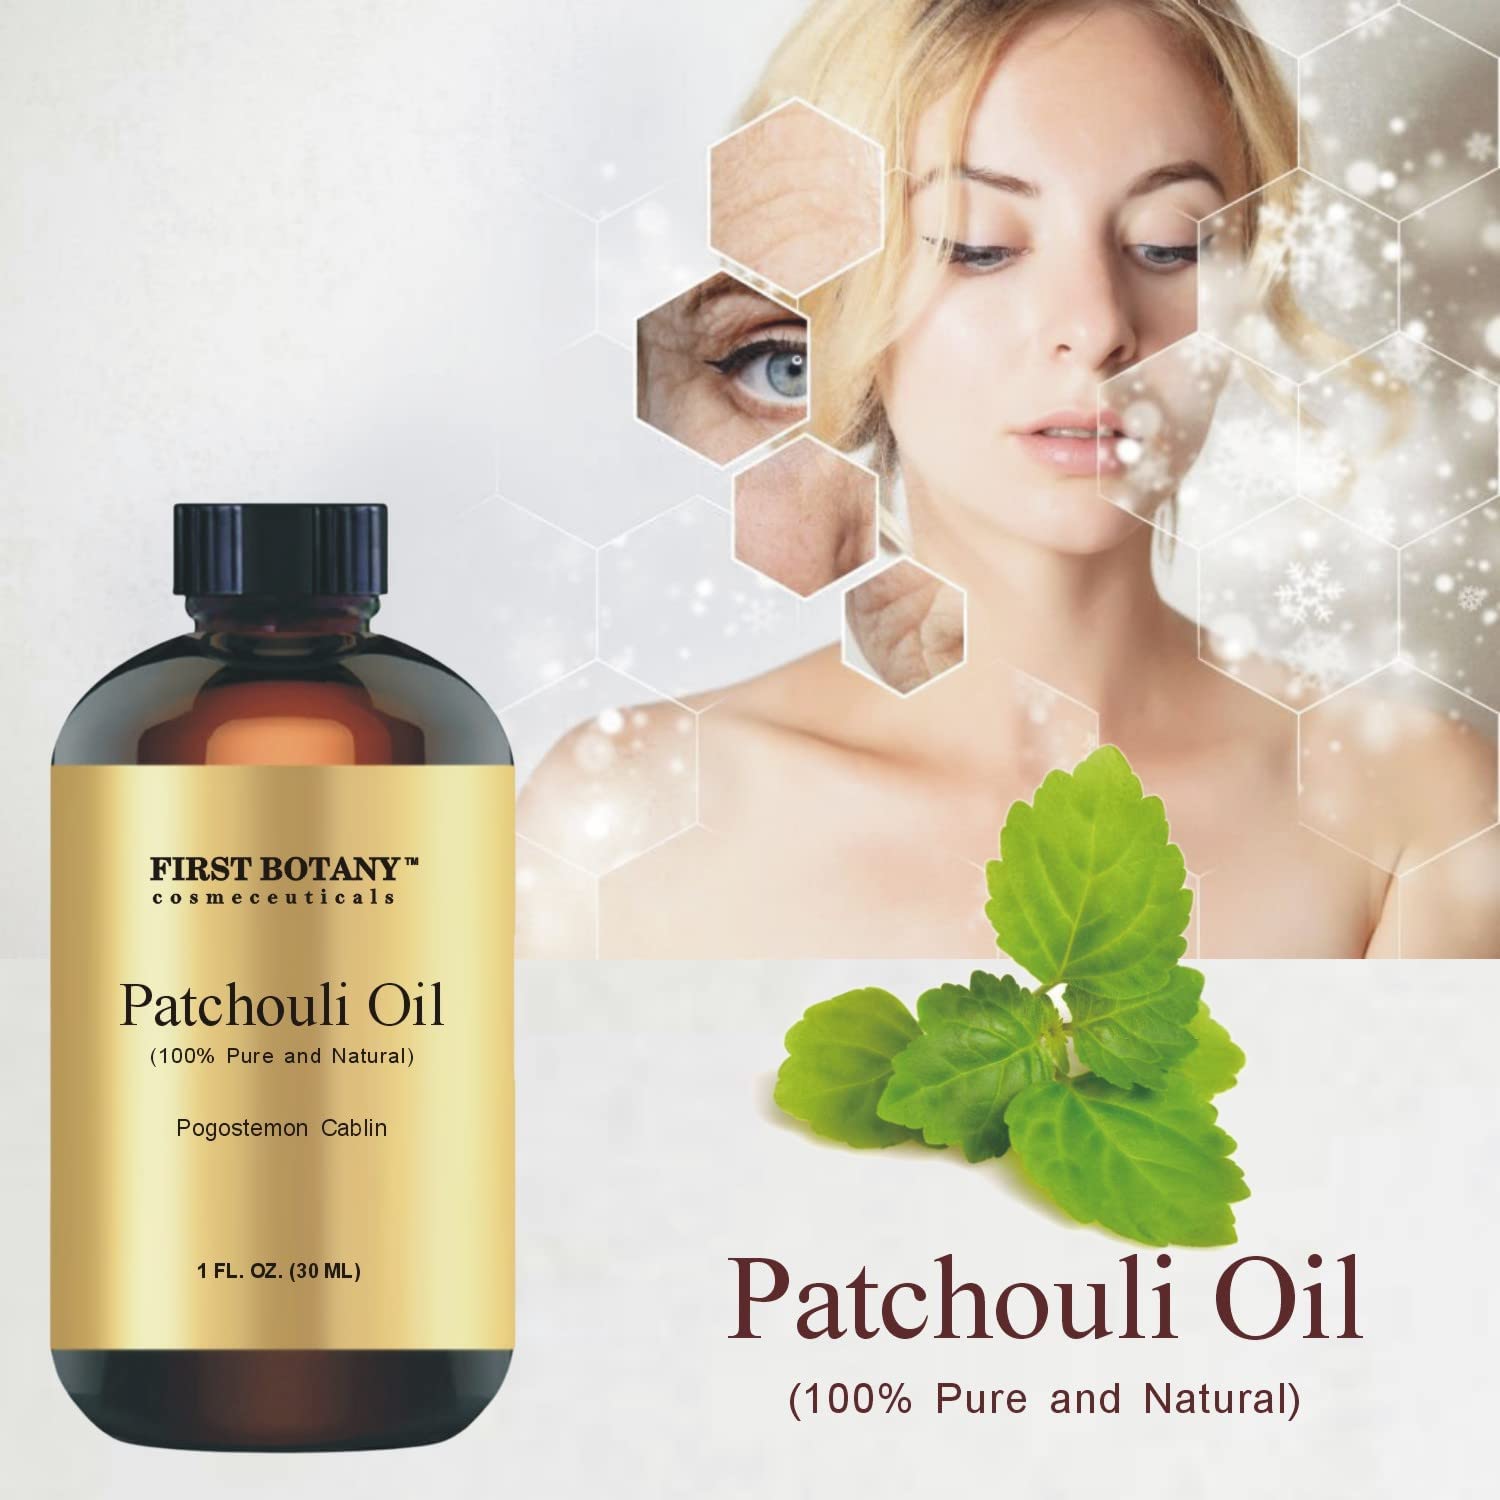 100% Pure Patchouli Essential Oil - Premium Patchouli Oil for Aromatherapy, Massage, Topical & Household Uses - 1 fl oz (Patchouli)